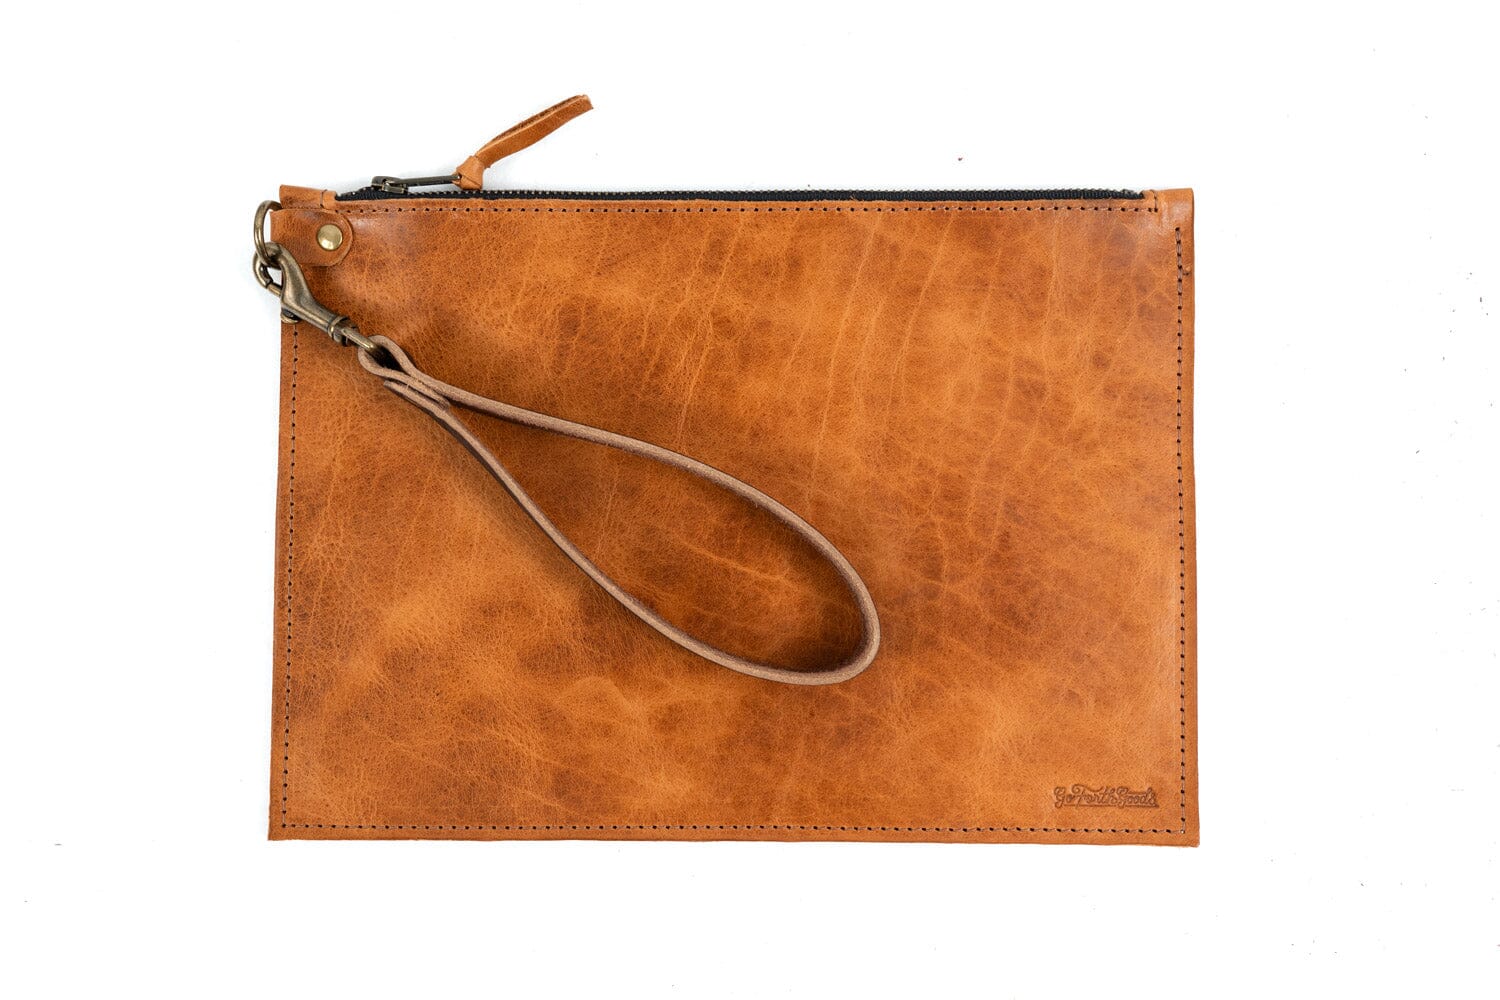 FELICITY ZIPPERED CLUTCH WITH WRISTLET LARGE - PEANUT BISON